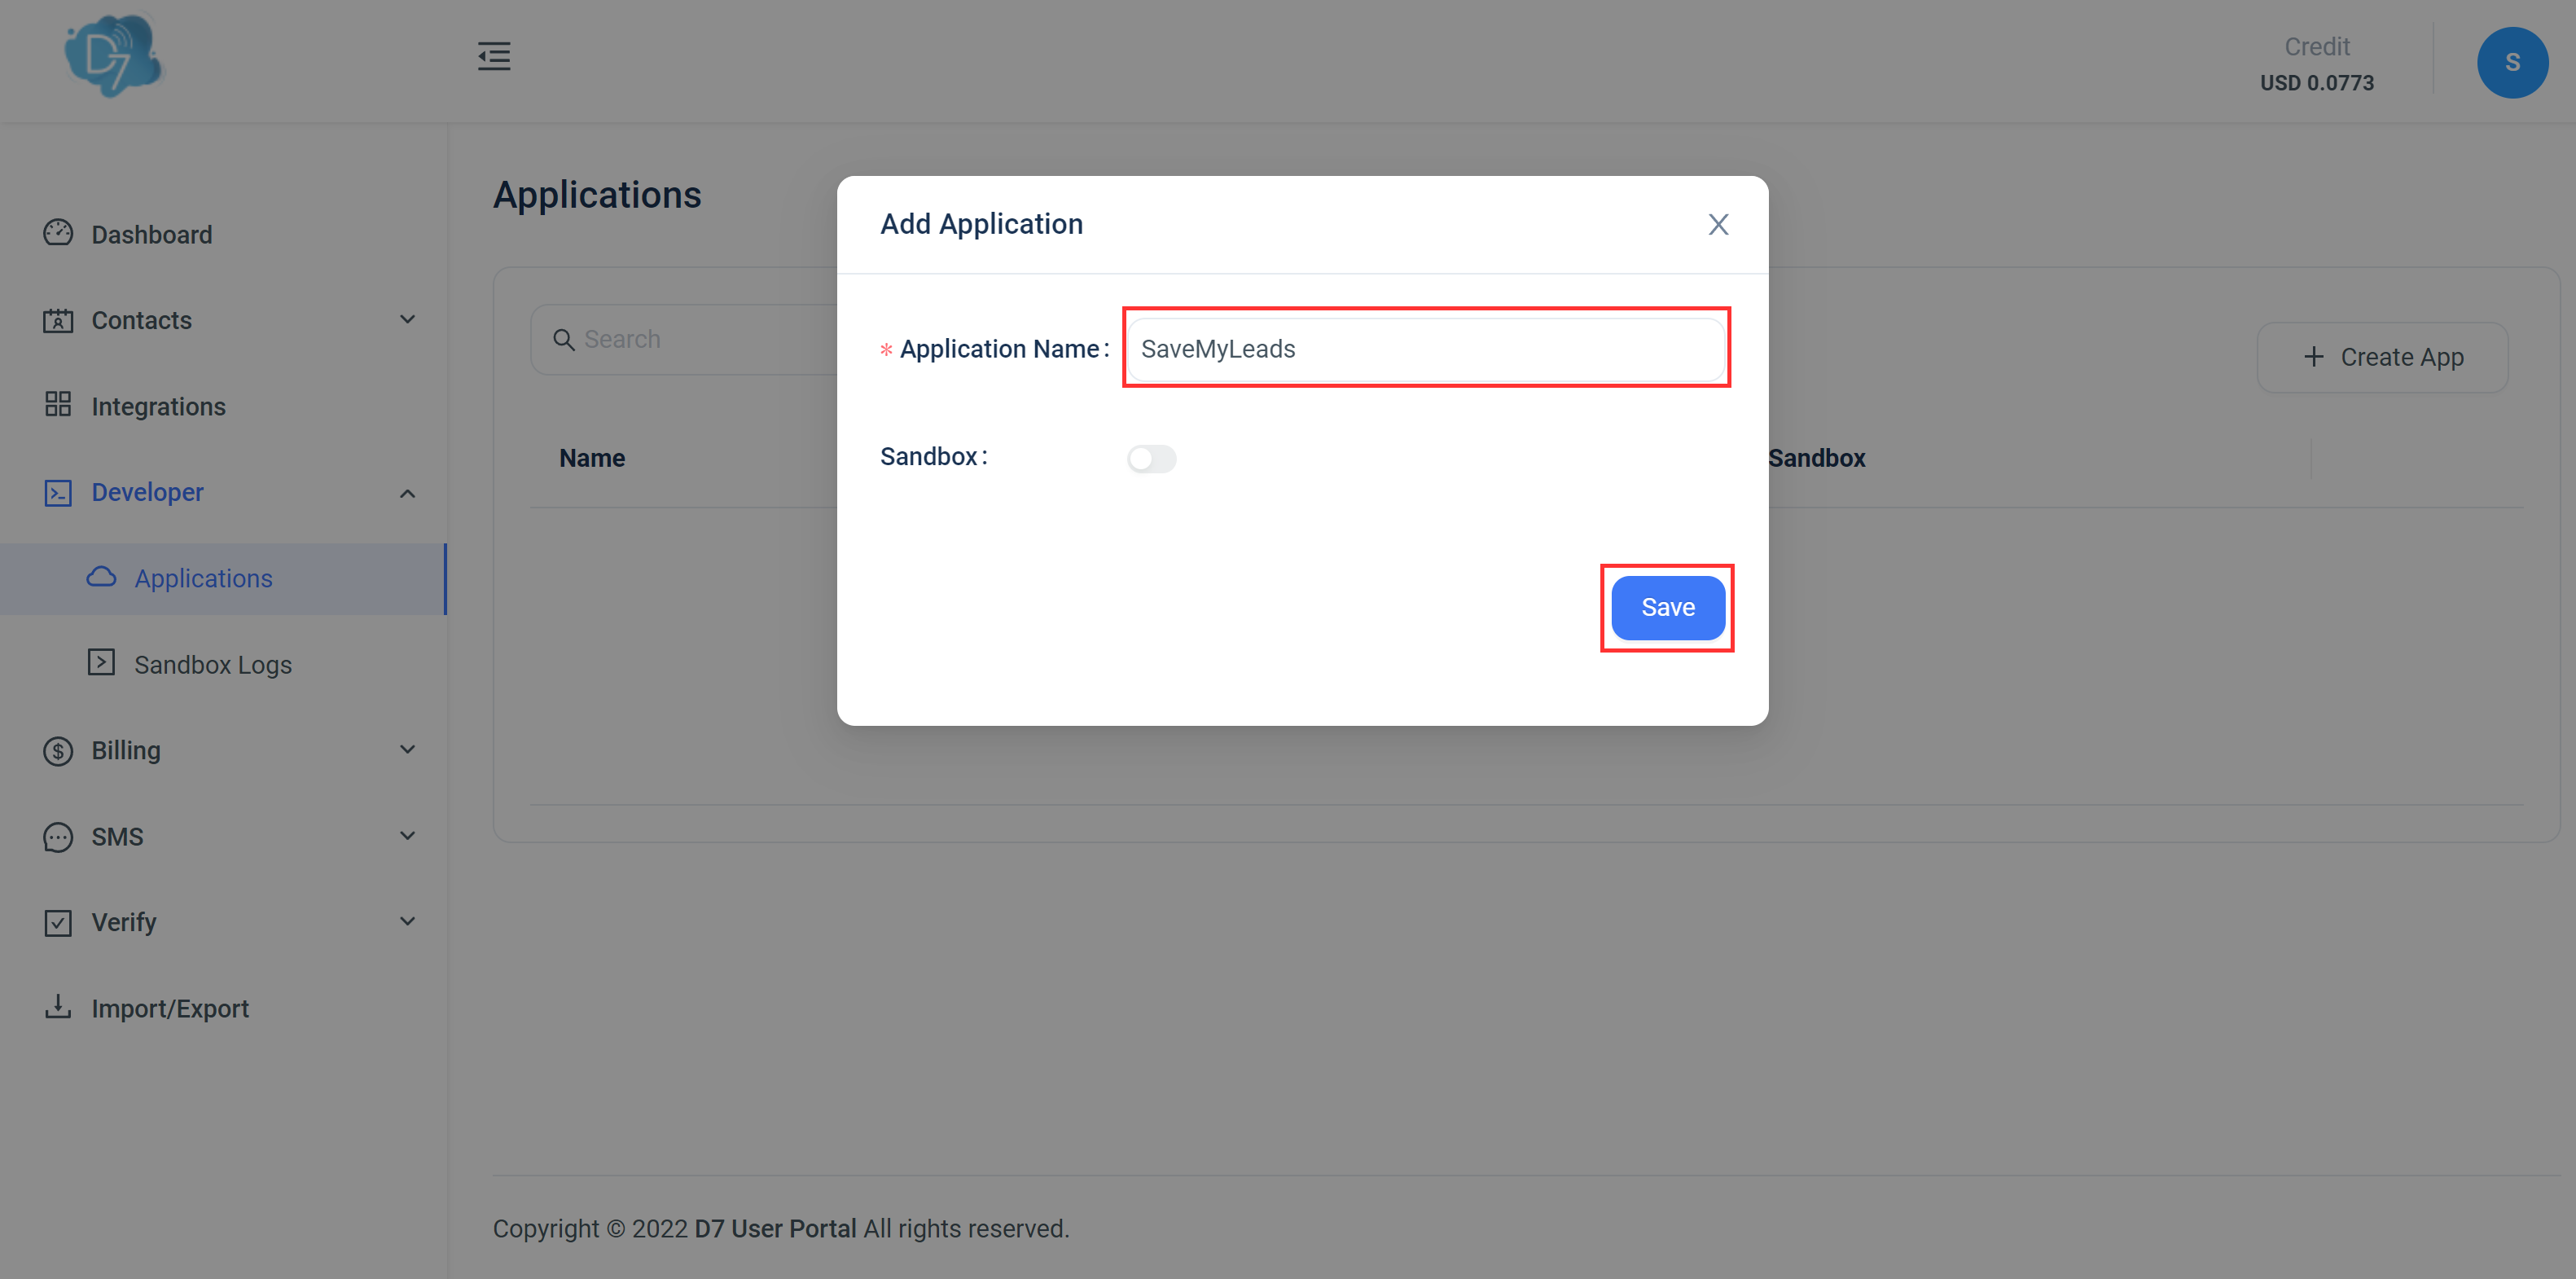 How to Connect Google Lead Form with D7 SMS | Data Destination account connection